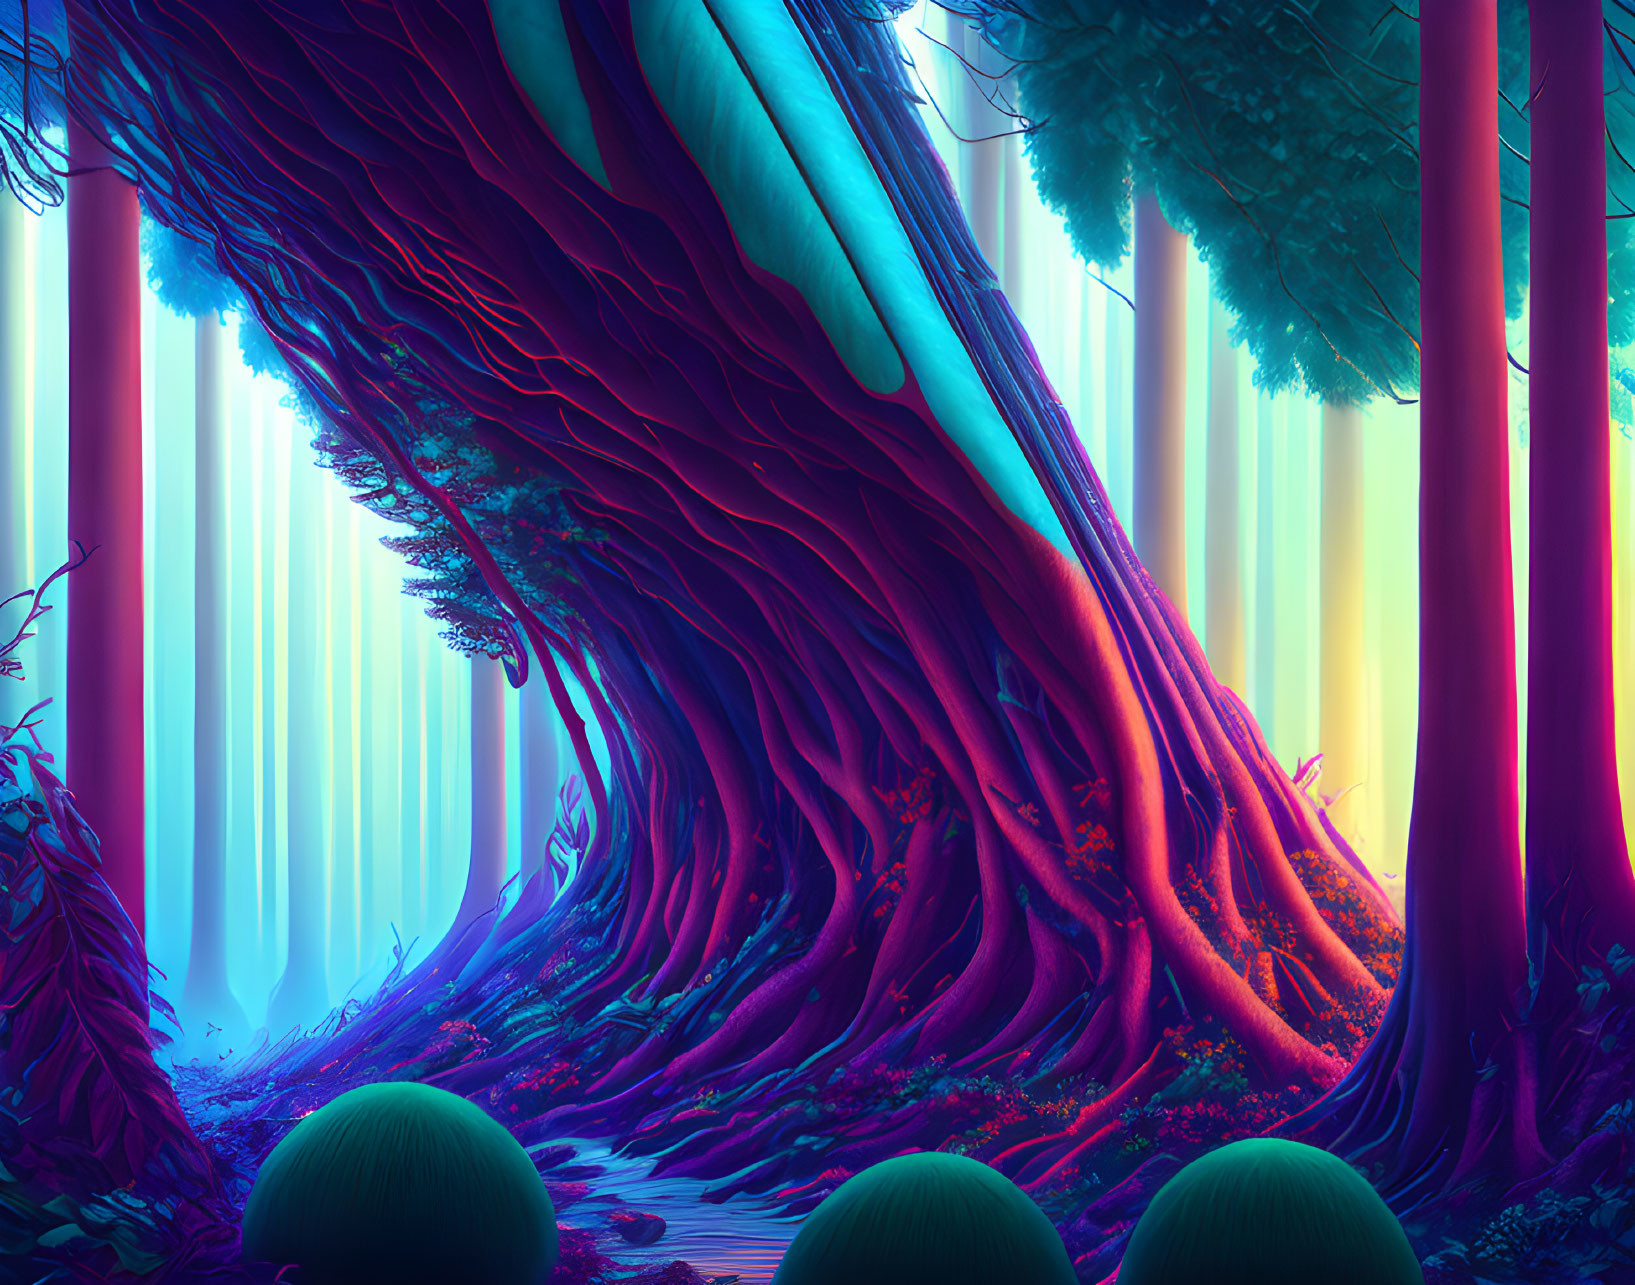 Colorful Psychedelic Forest with Twisted Tree & Ethereal Lights